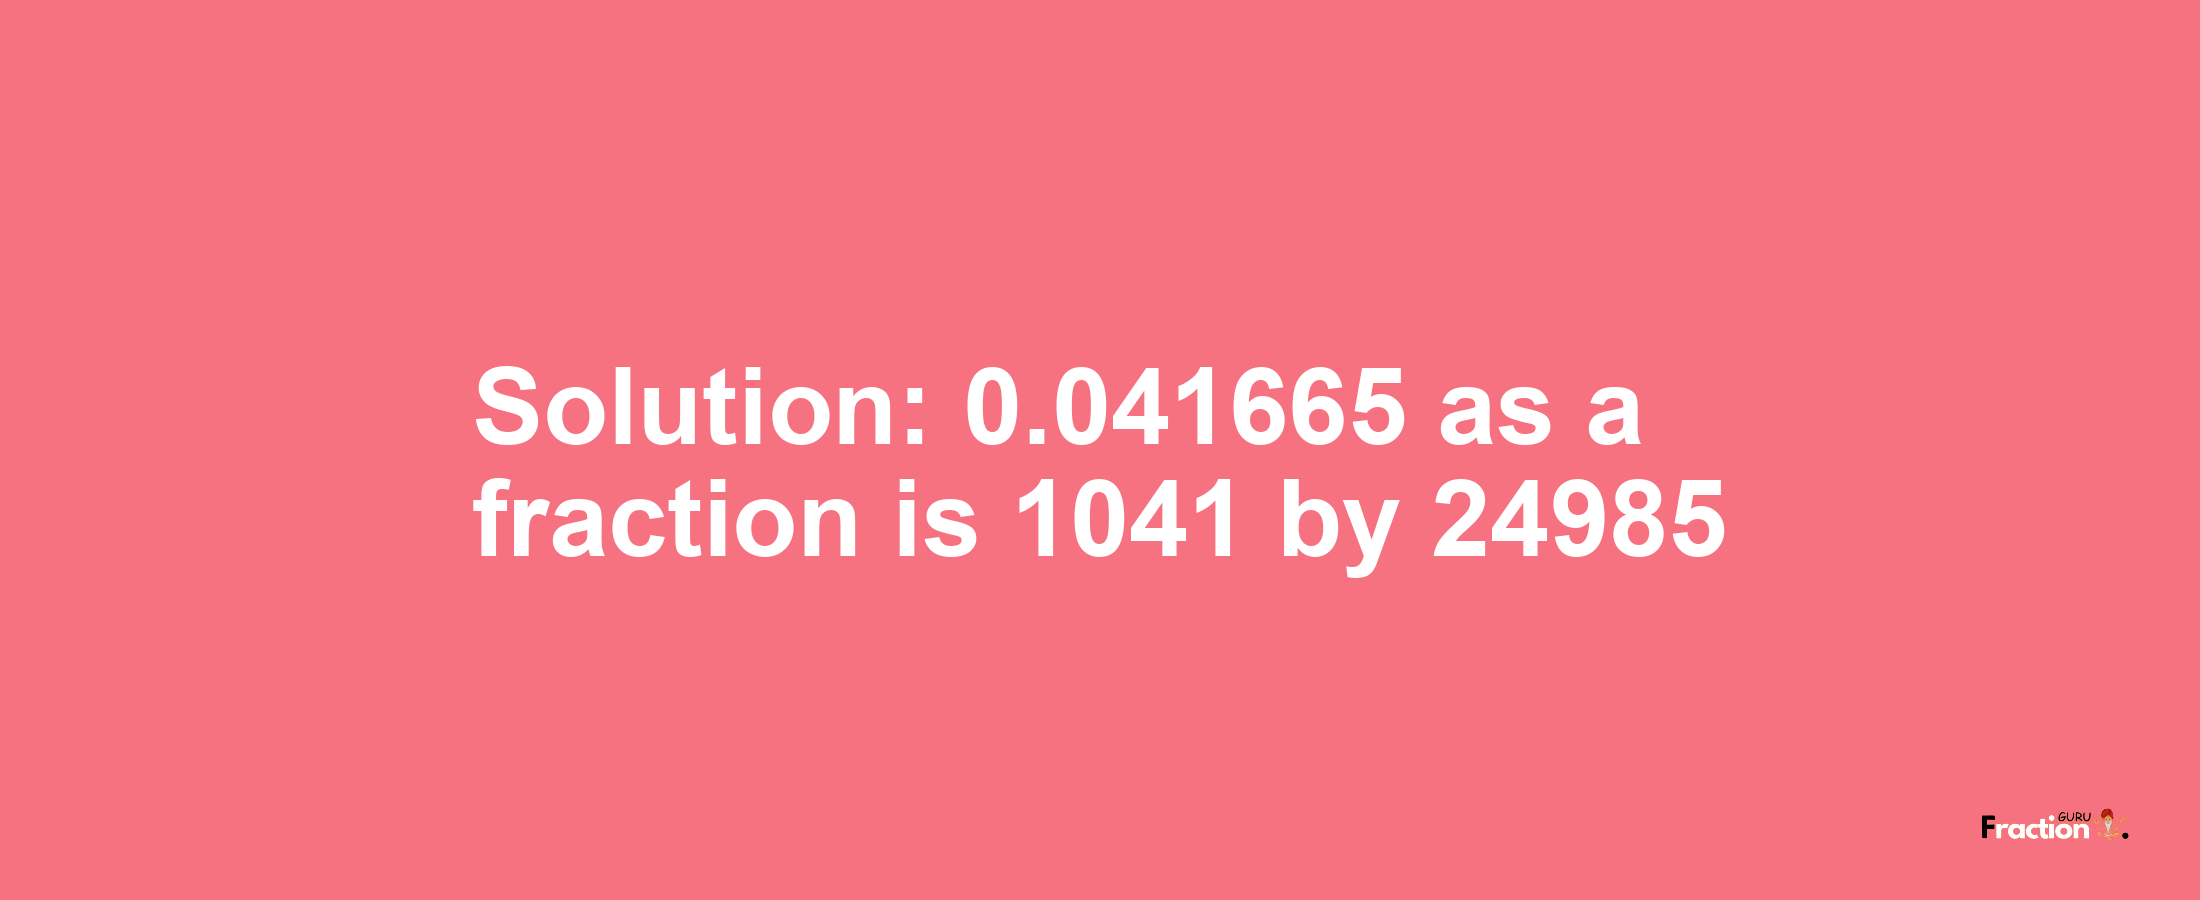 Solution:0.041665 as a fraction is 1041/24985